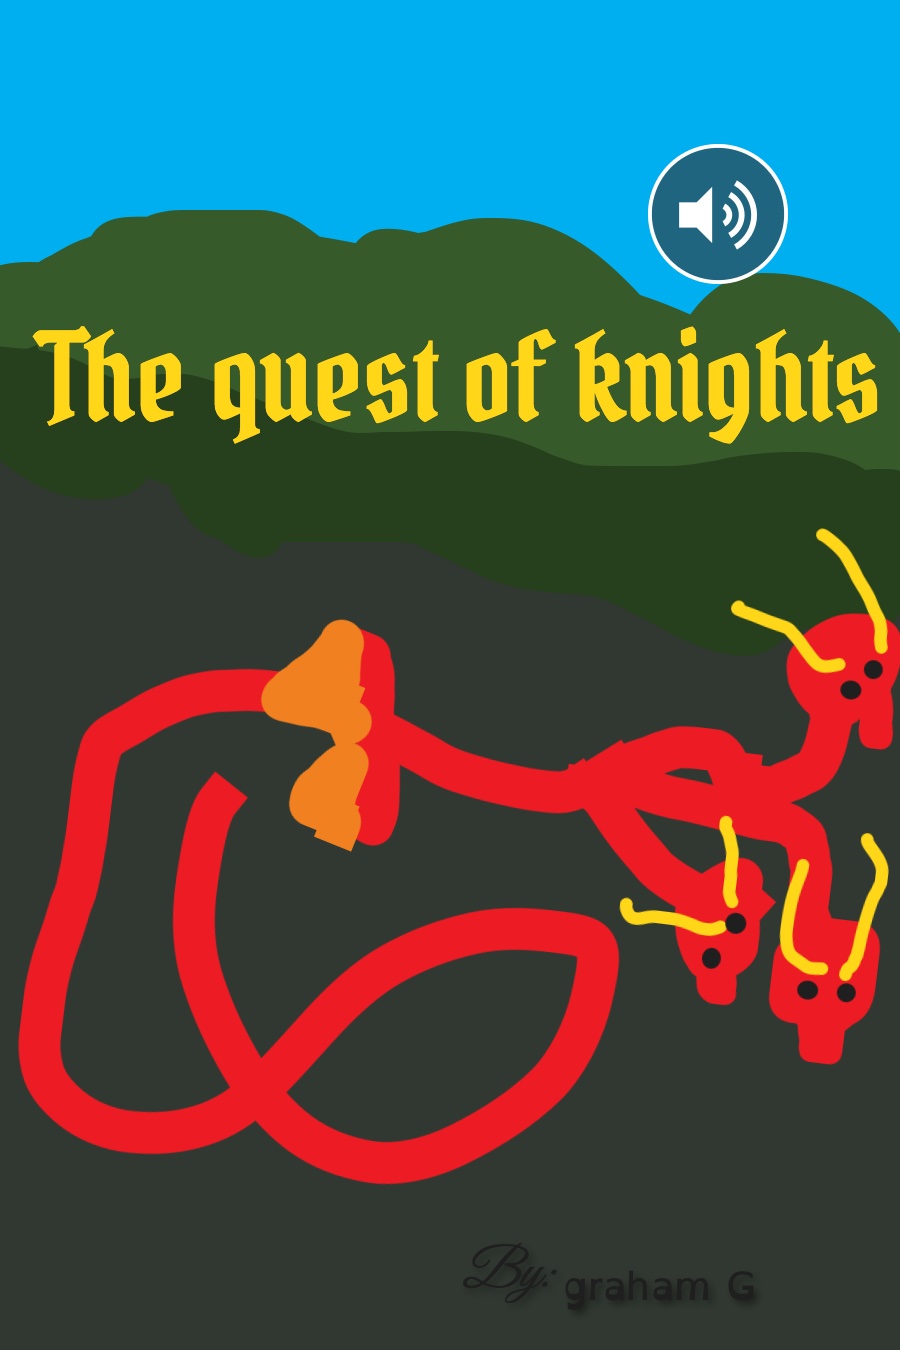 The quest of knights (1)